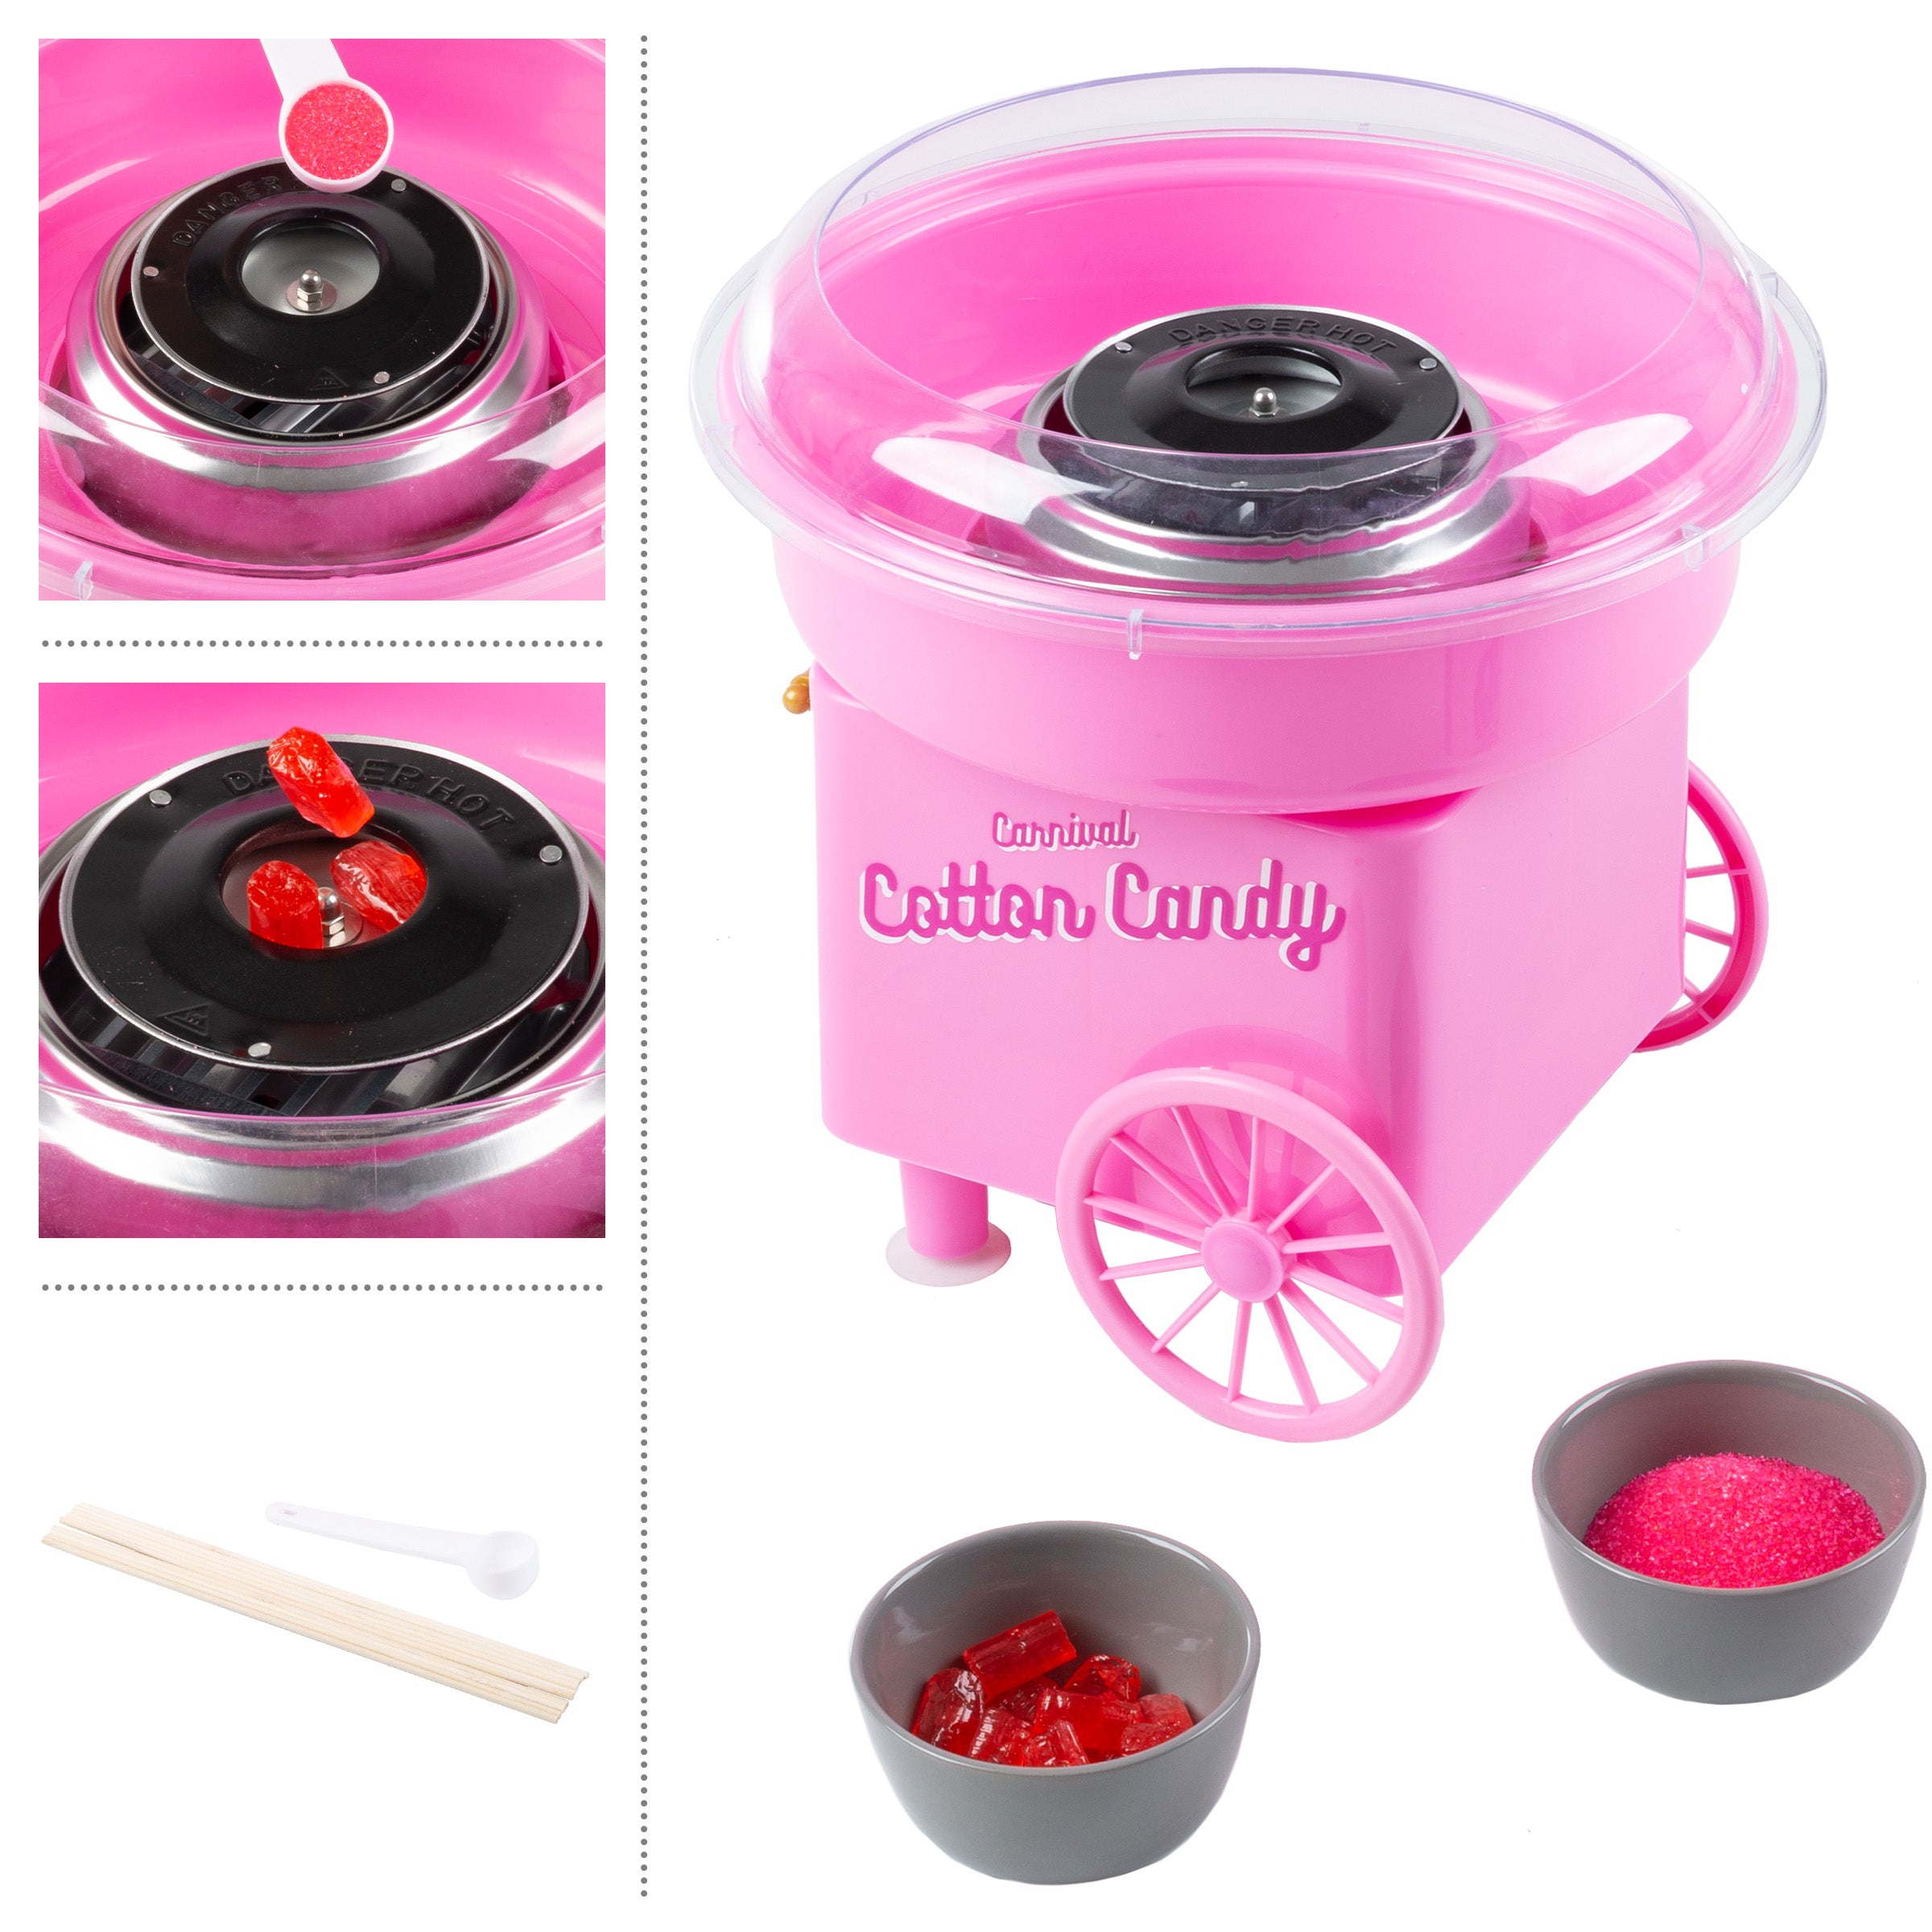 Countertop Cotton Candy Machine – Includes Scoop and 10 Serving